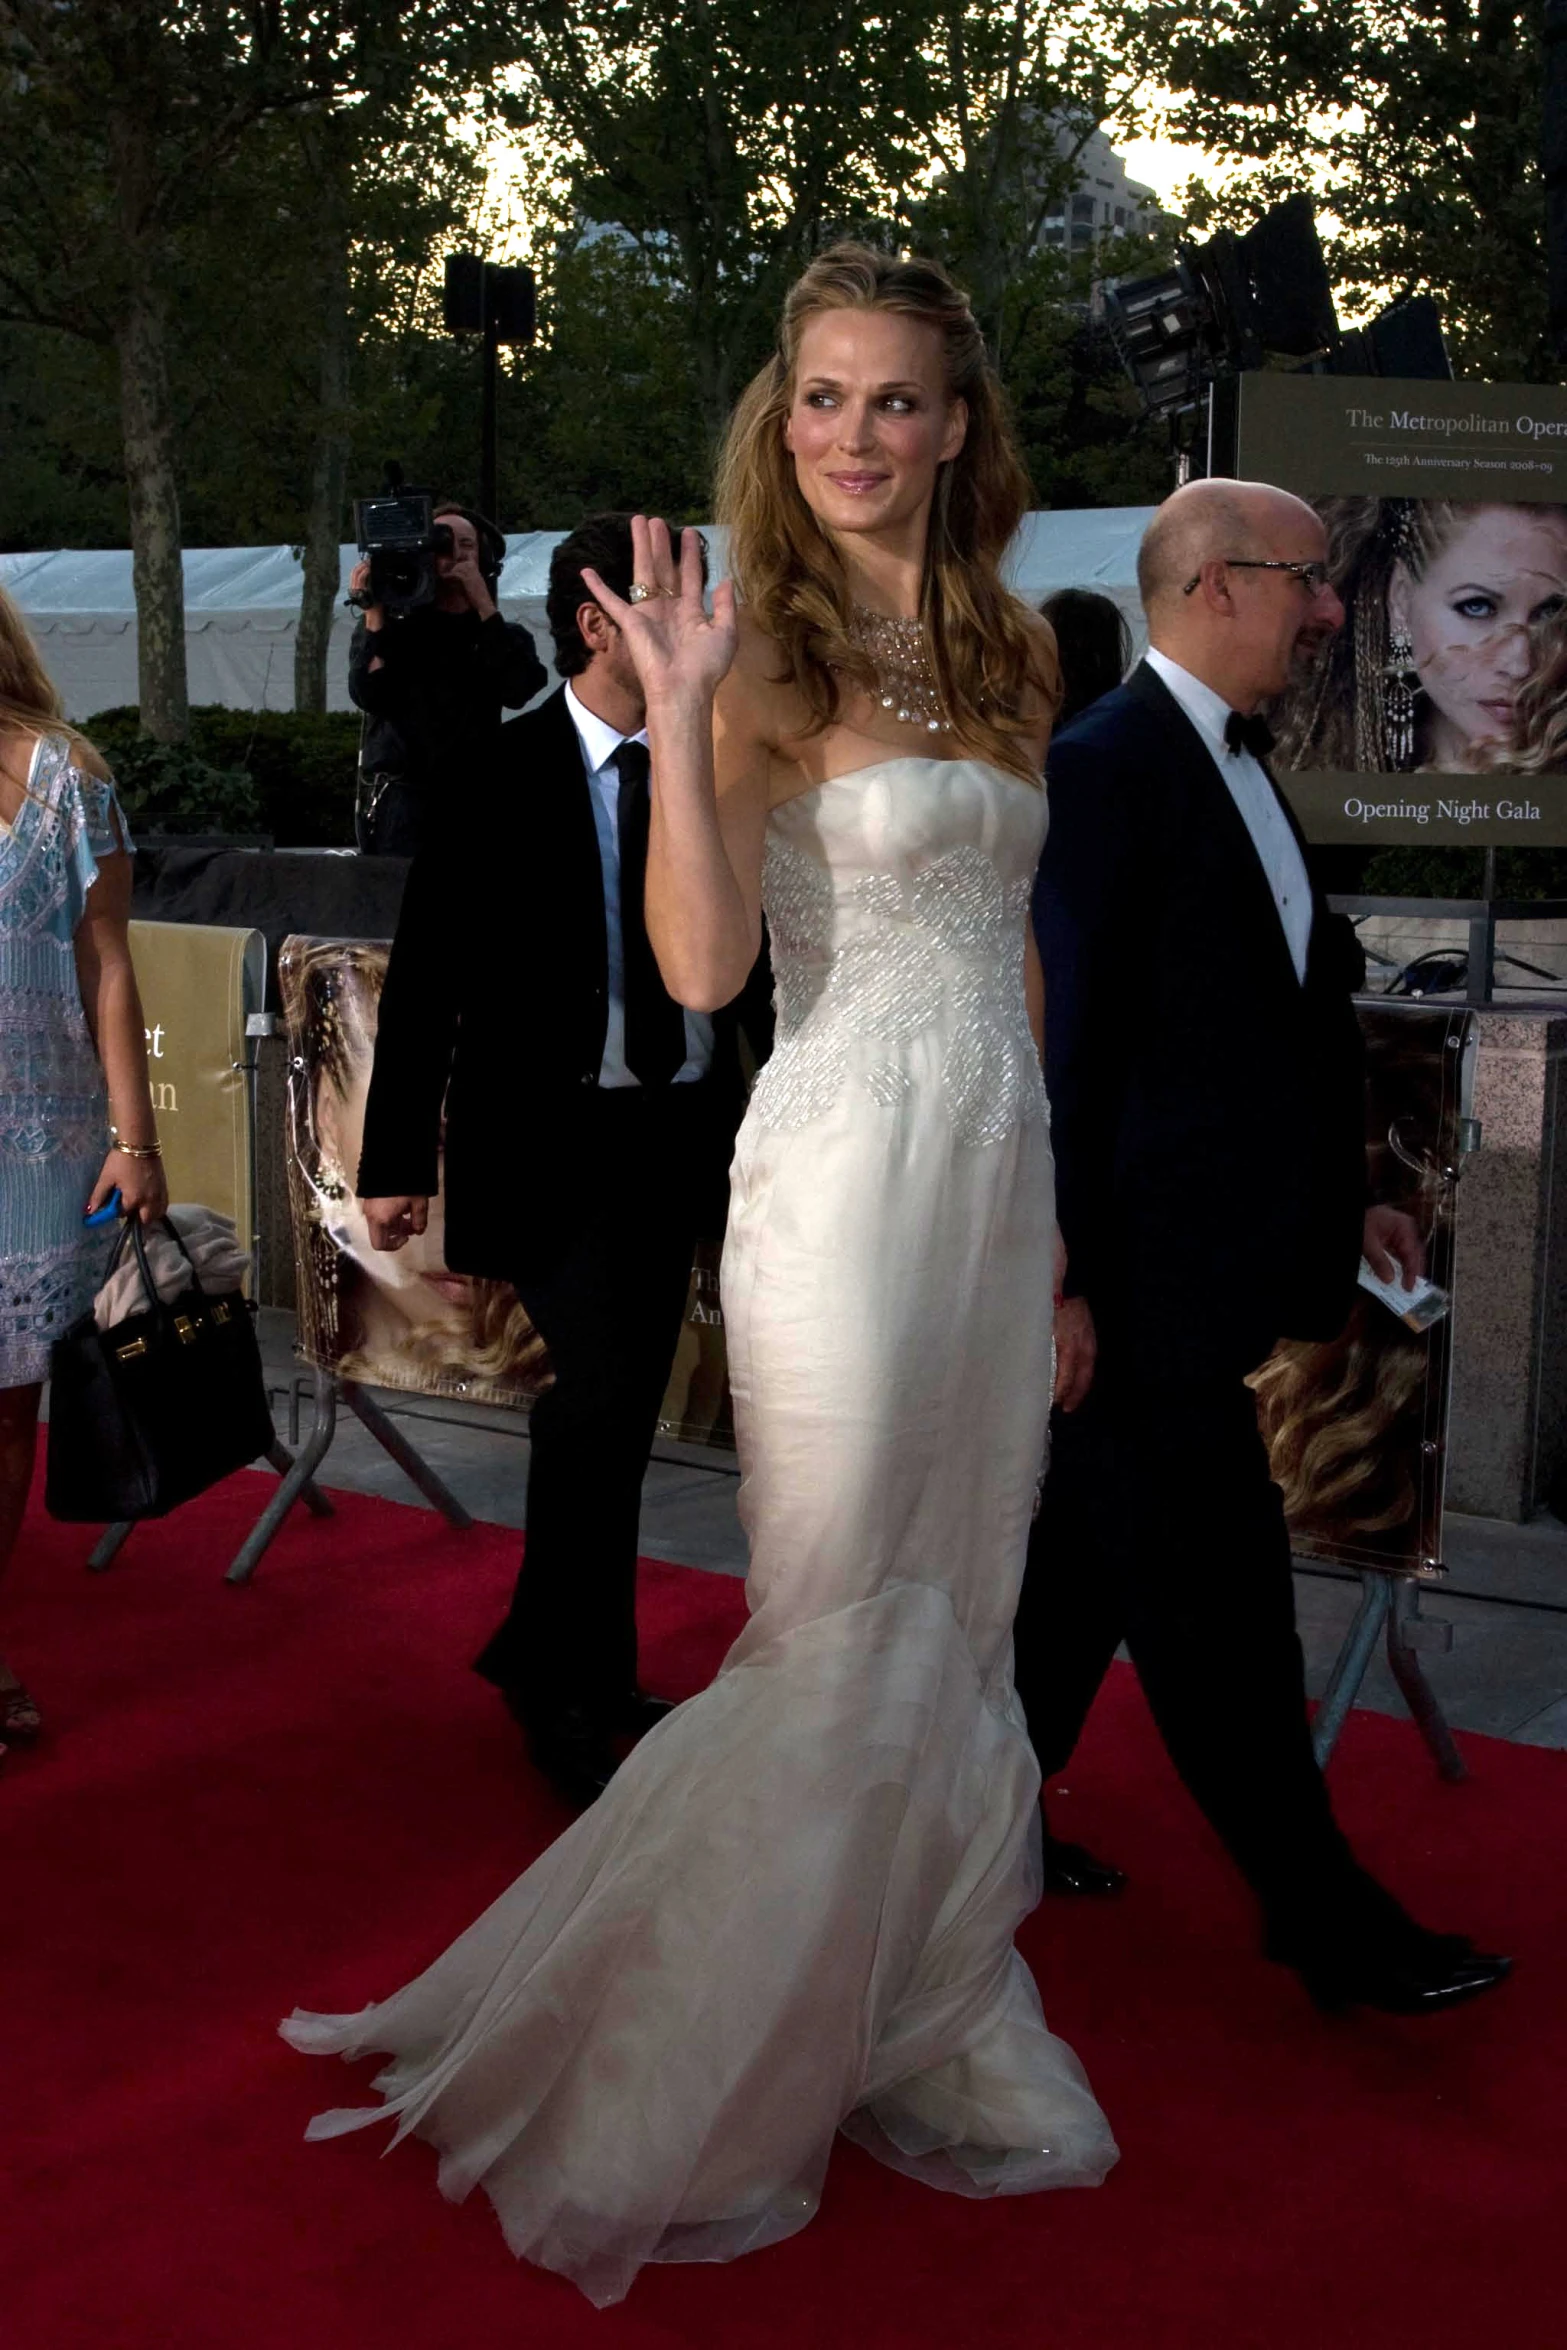 a lady in white dress walking on a red carpet